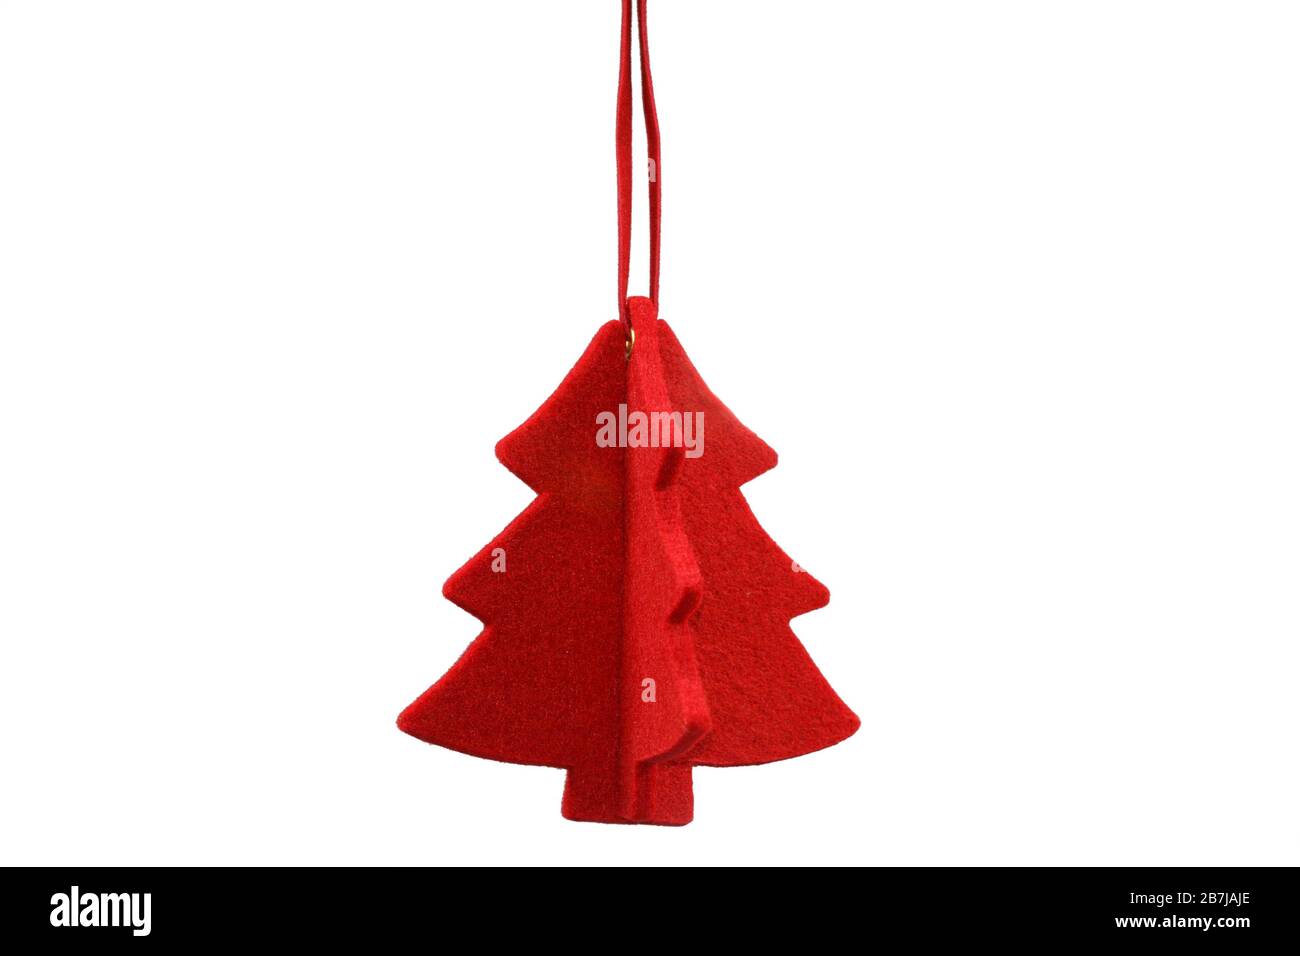 Red Christmas Tree: red stylized Christmas tree made from felt Stock Photo